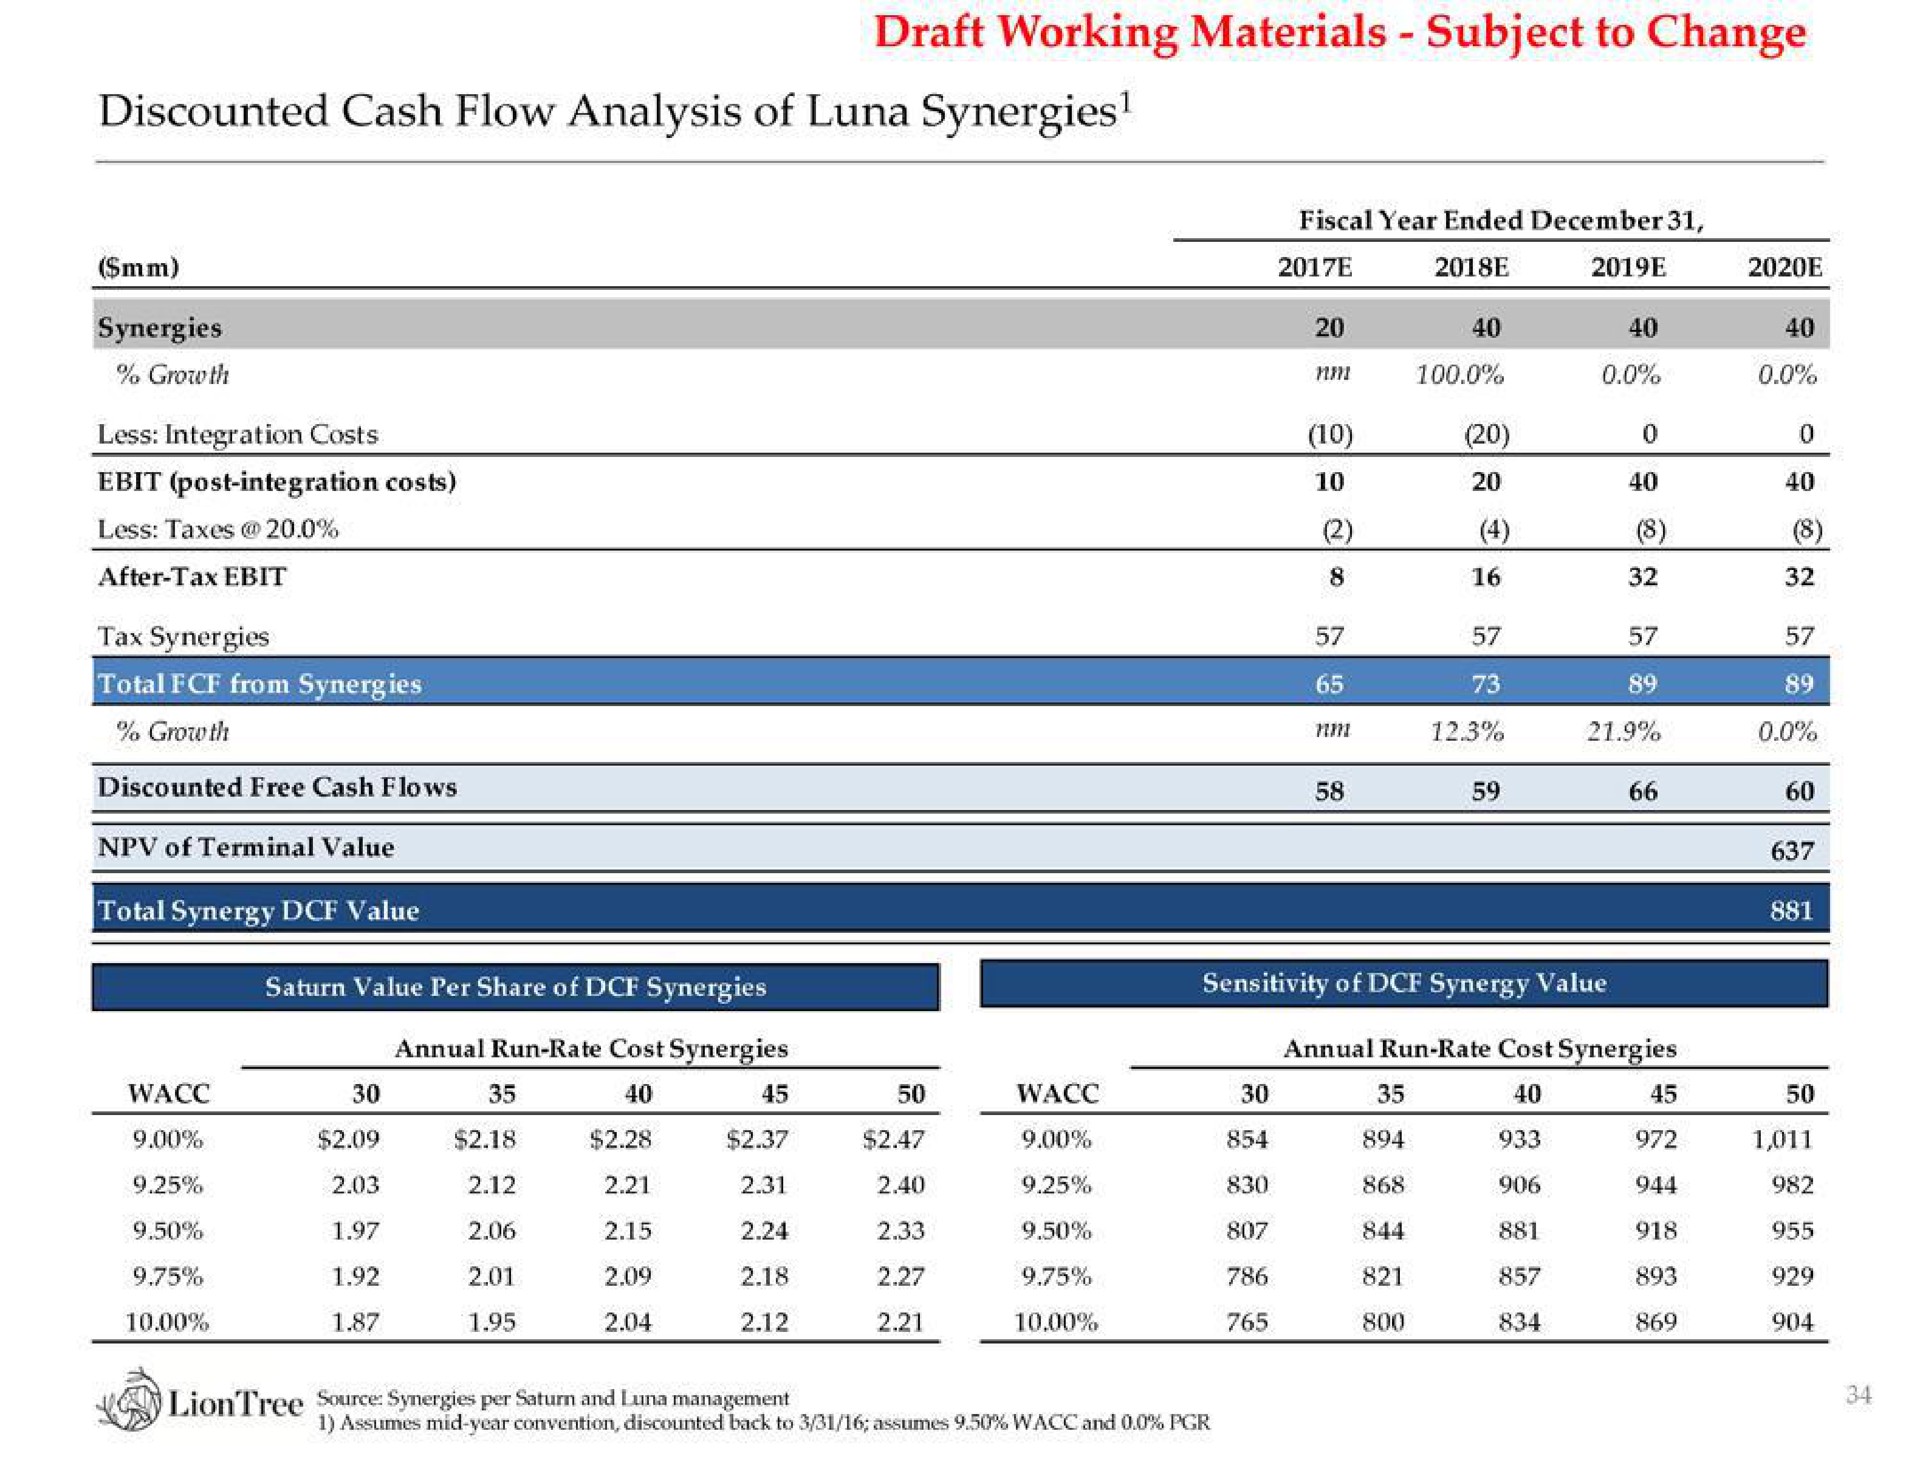 discounted cash flow analysis of luna synergies draft working materials subject to change | LionTree